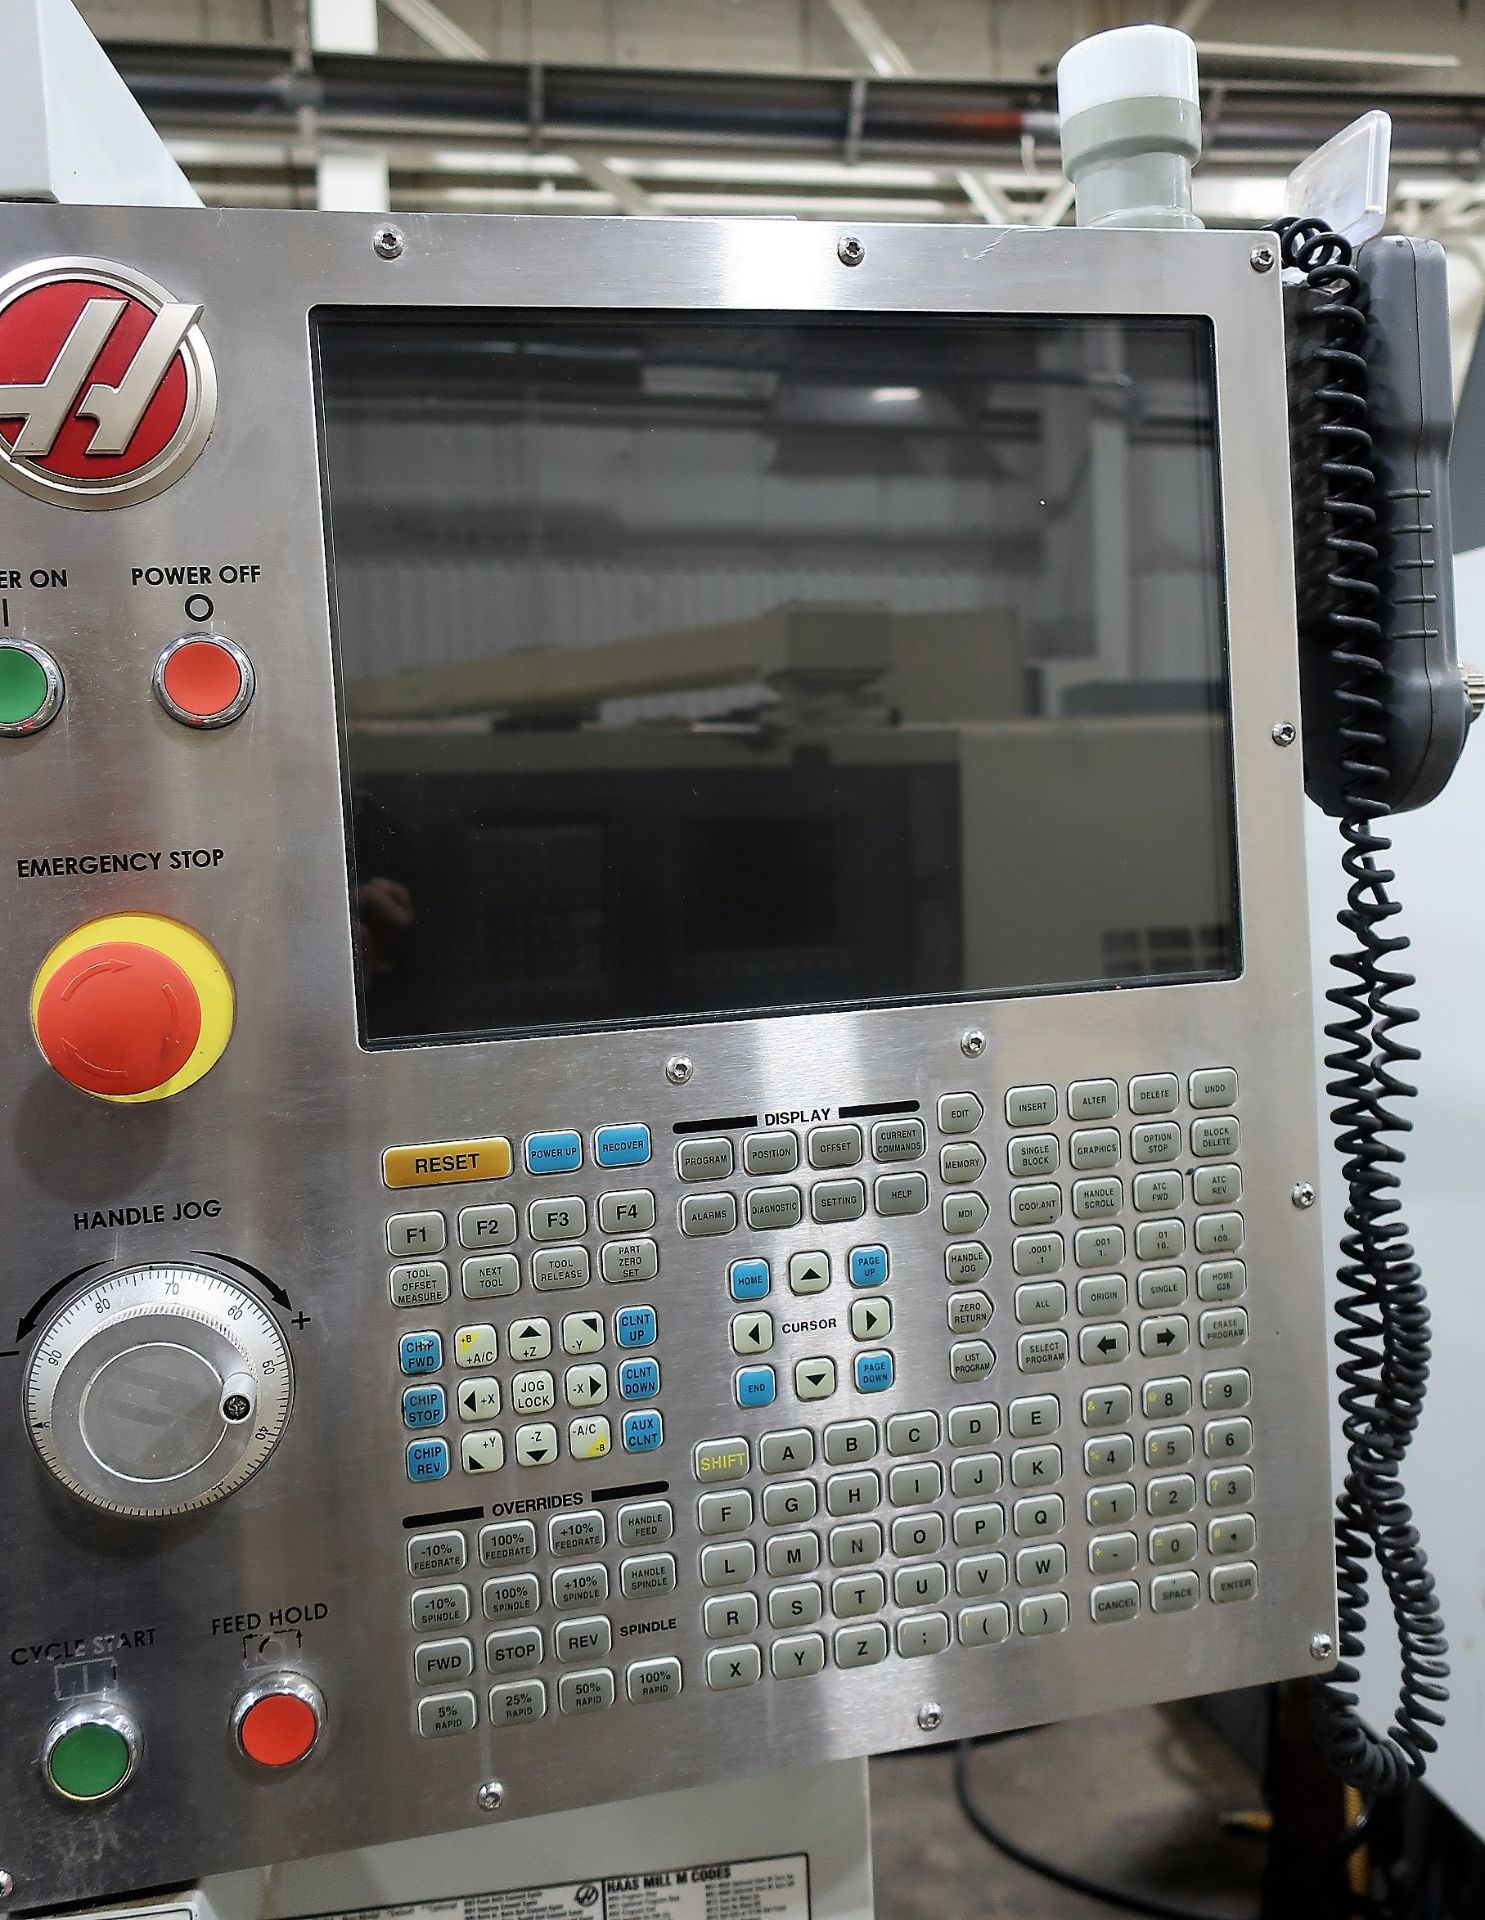 HAAS DT-1 4-AXIS CNC DRILL/TAP/VERTICAL MACHINING CENTER, S/N 1132186, New 2016 - Image 2 of 10